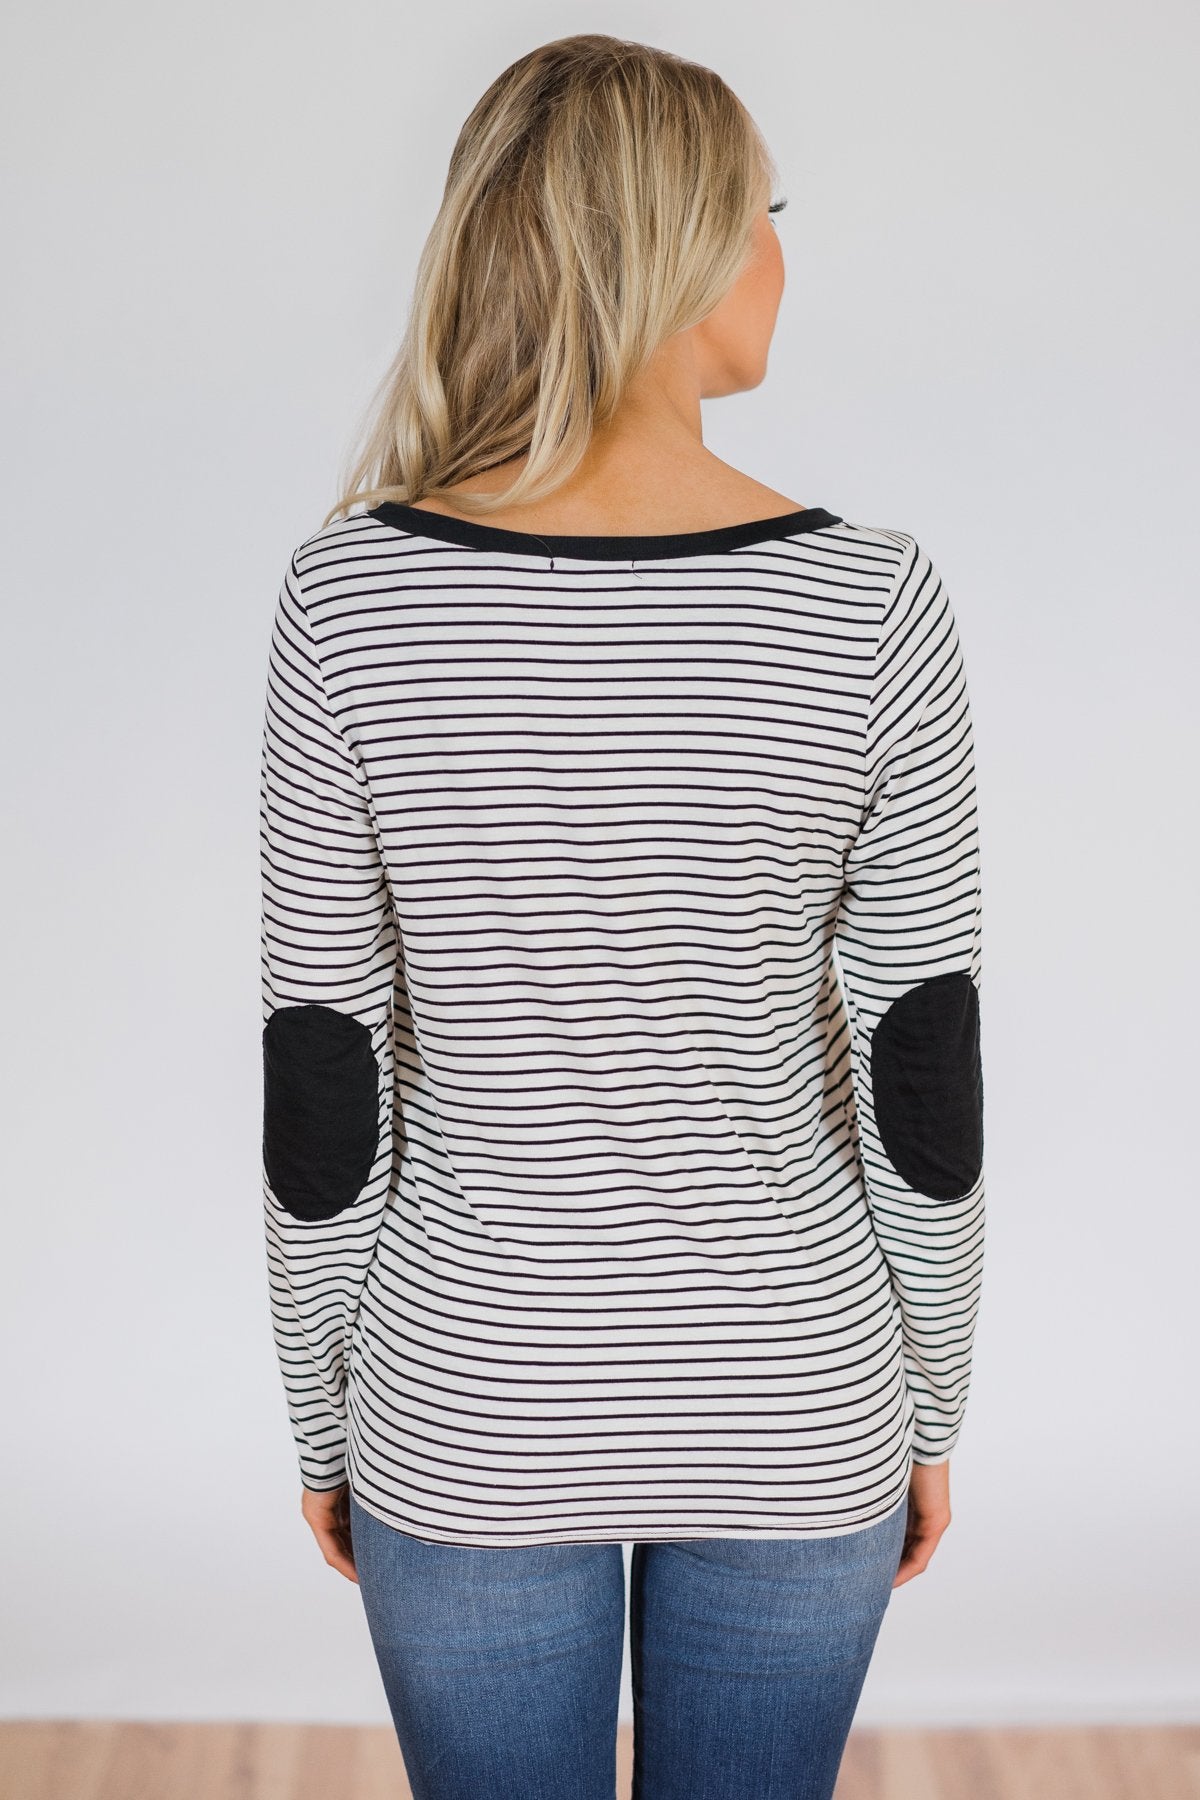 Striped Elbow Patch Long Sleeve Top- Black & White